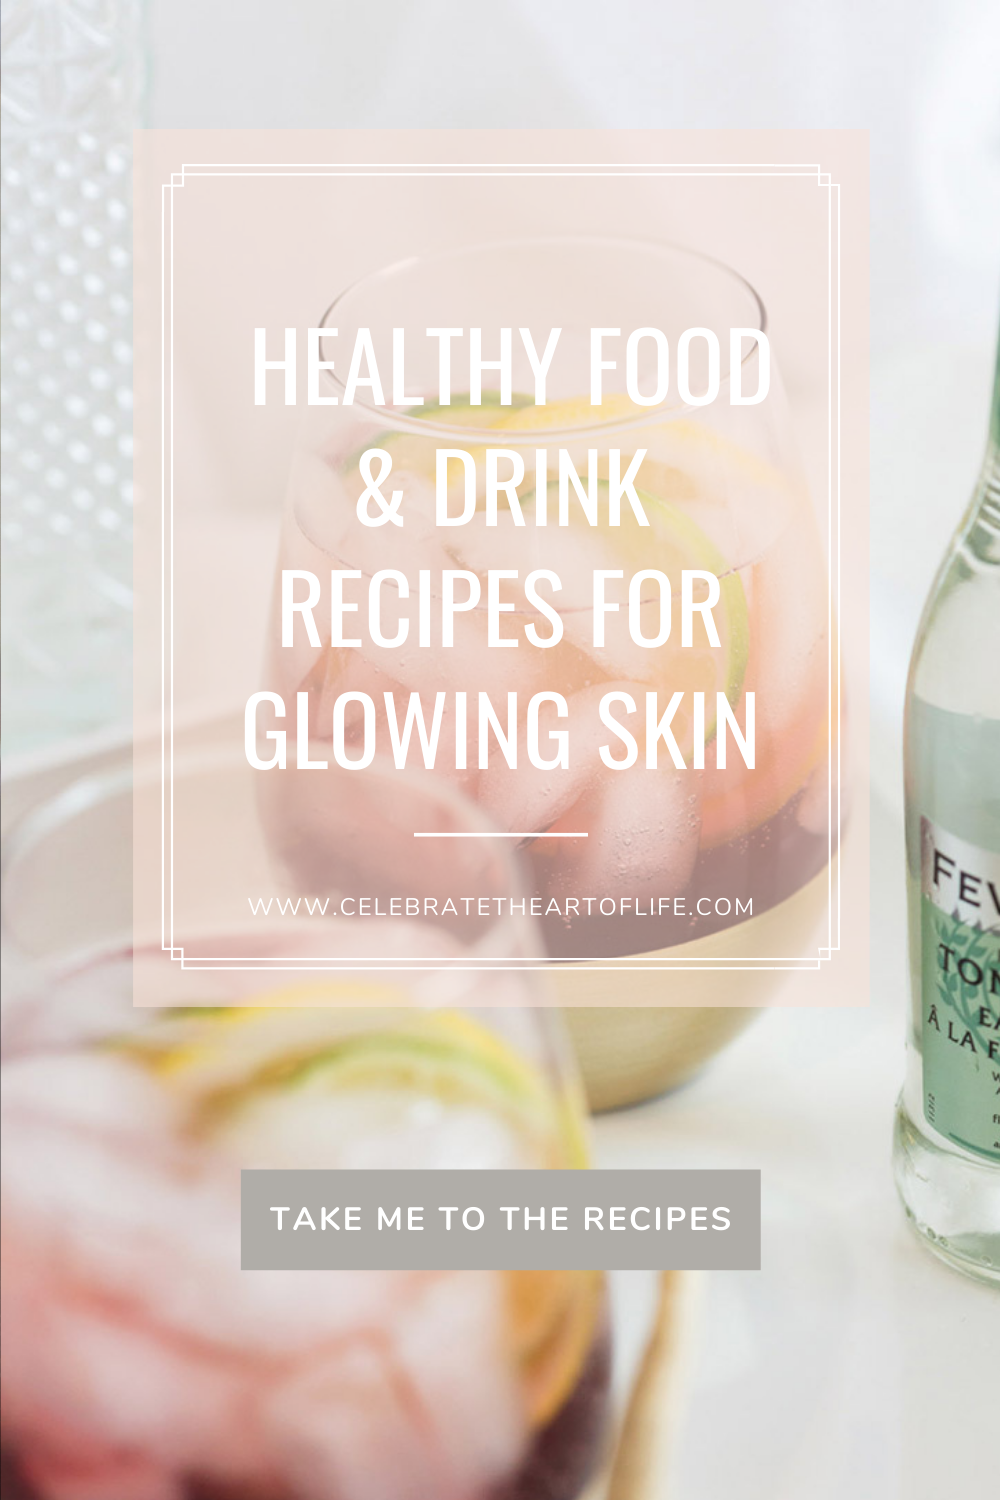 Healthy Food & Drink Recipes for Glowing Skin